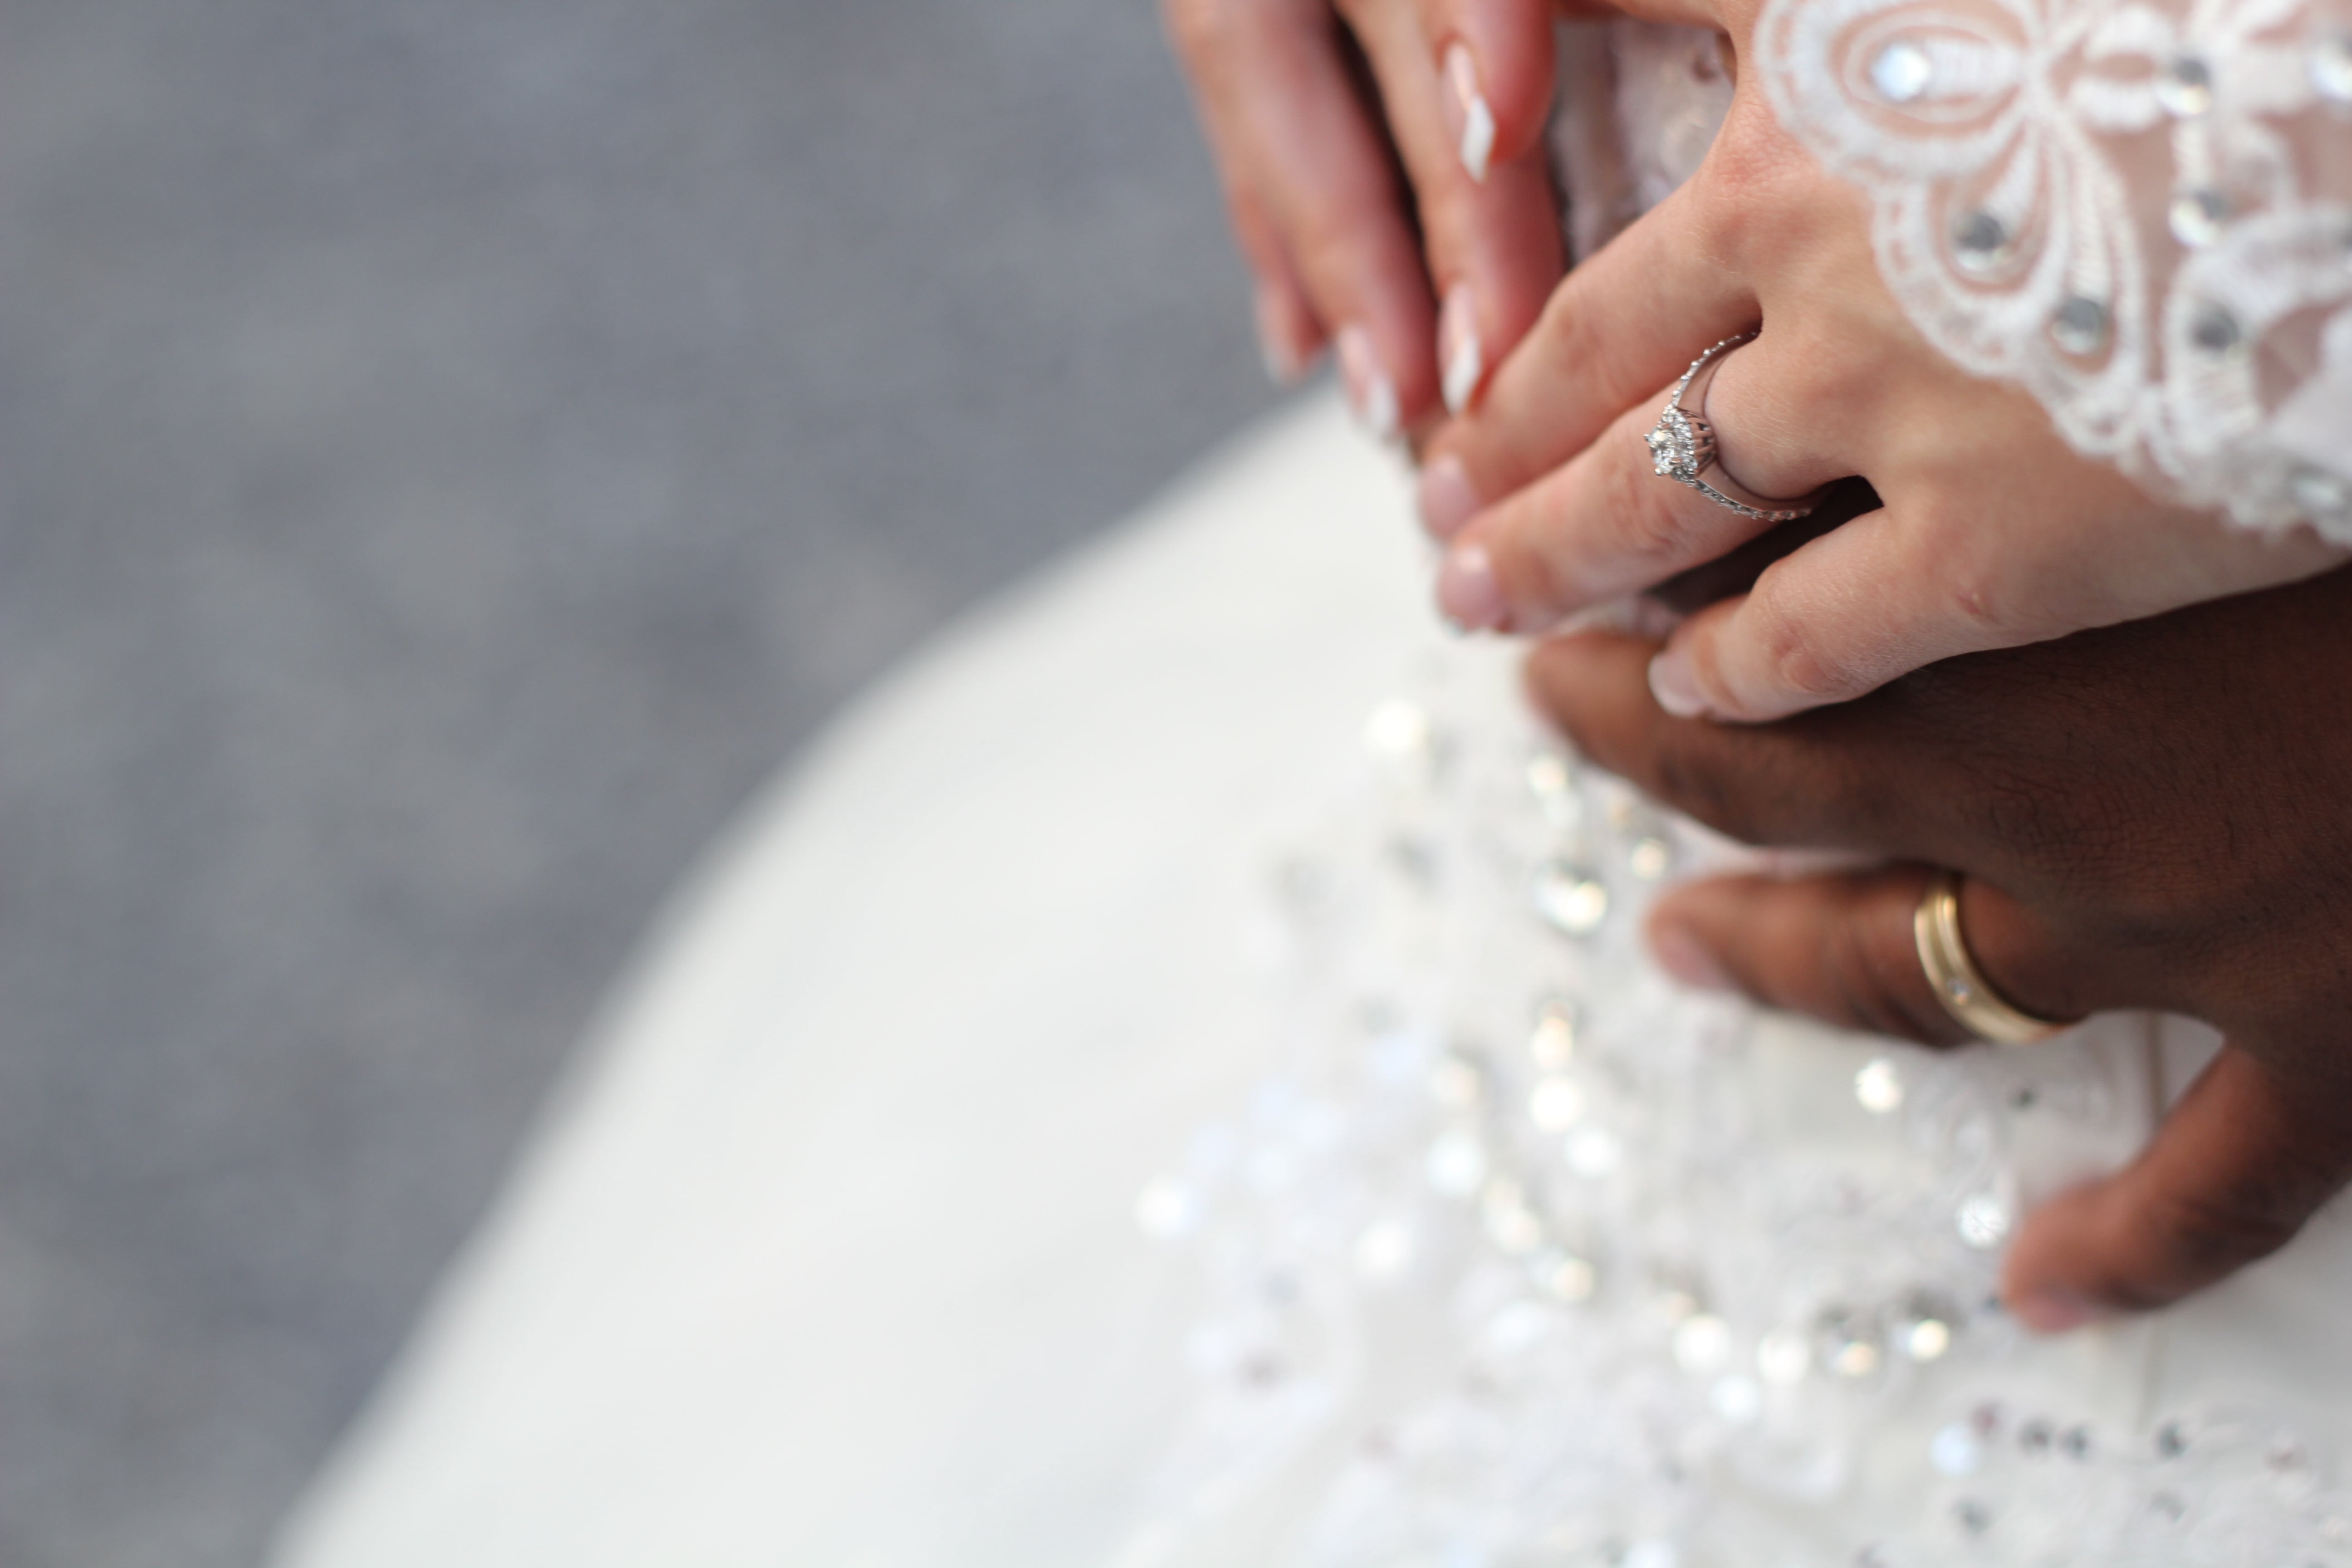 How much of your finger does your ring cover?, Weddings, Wedding Attire, Wedding Forums